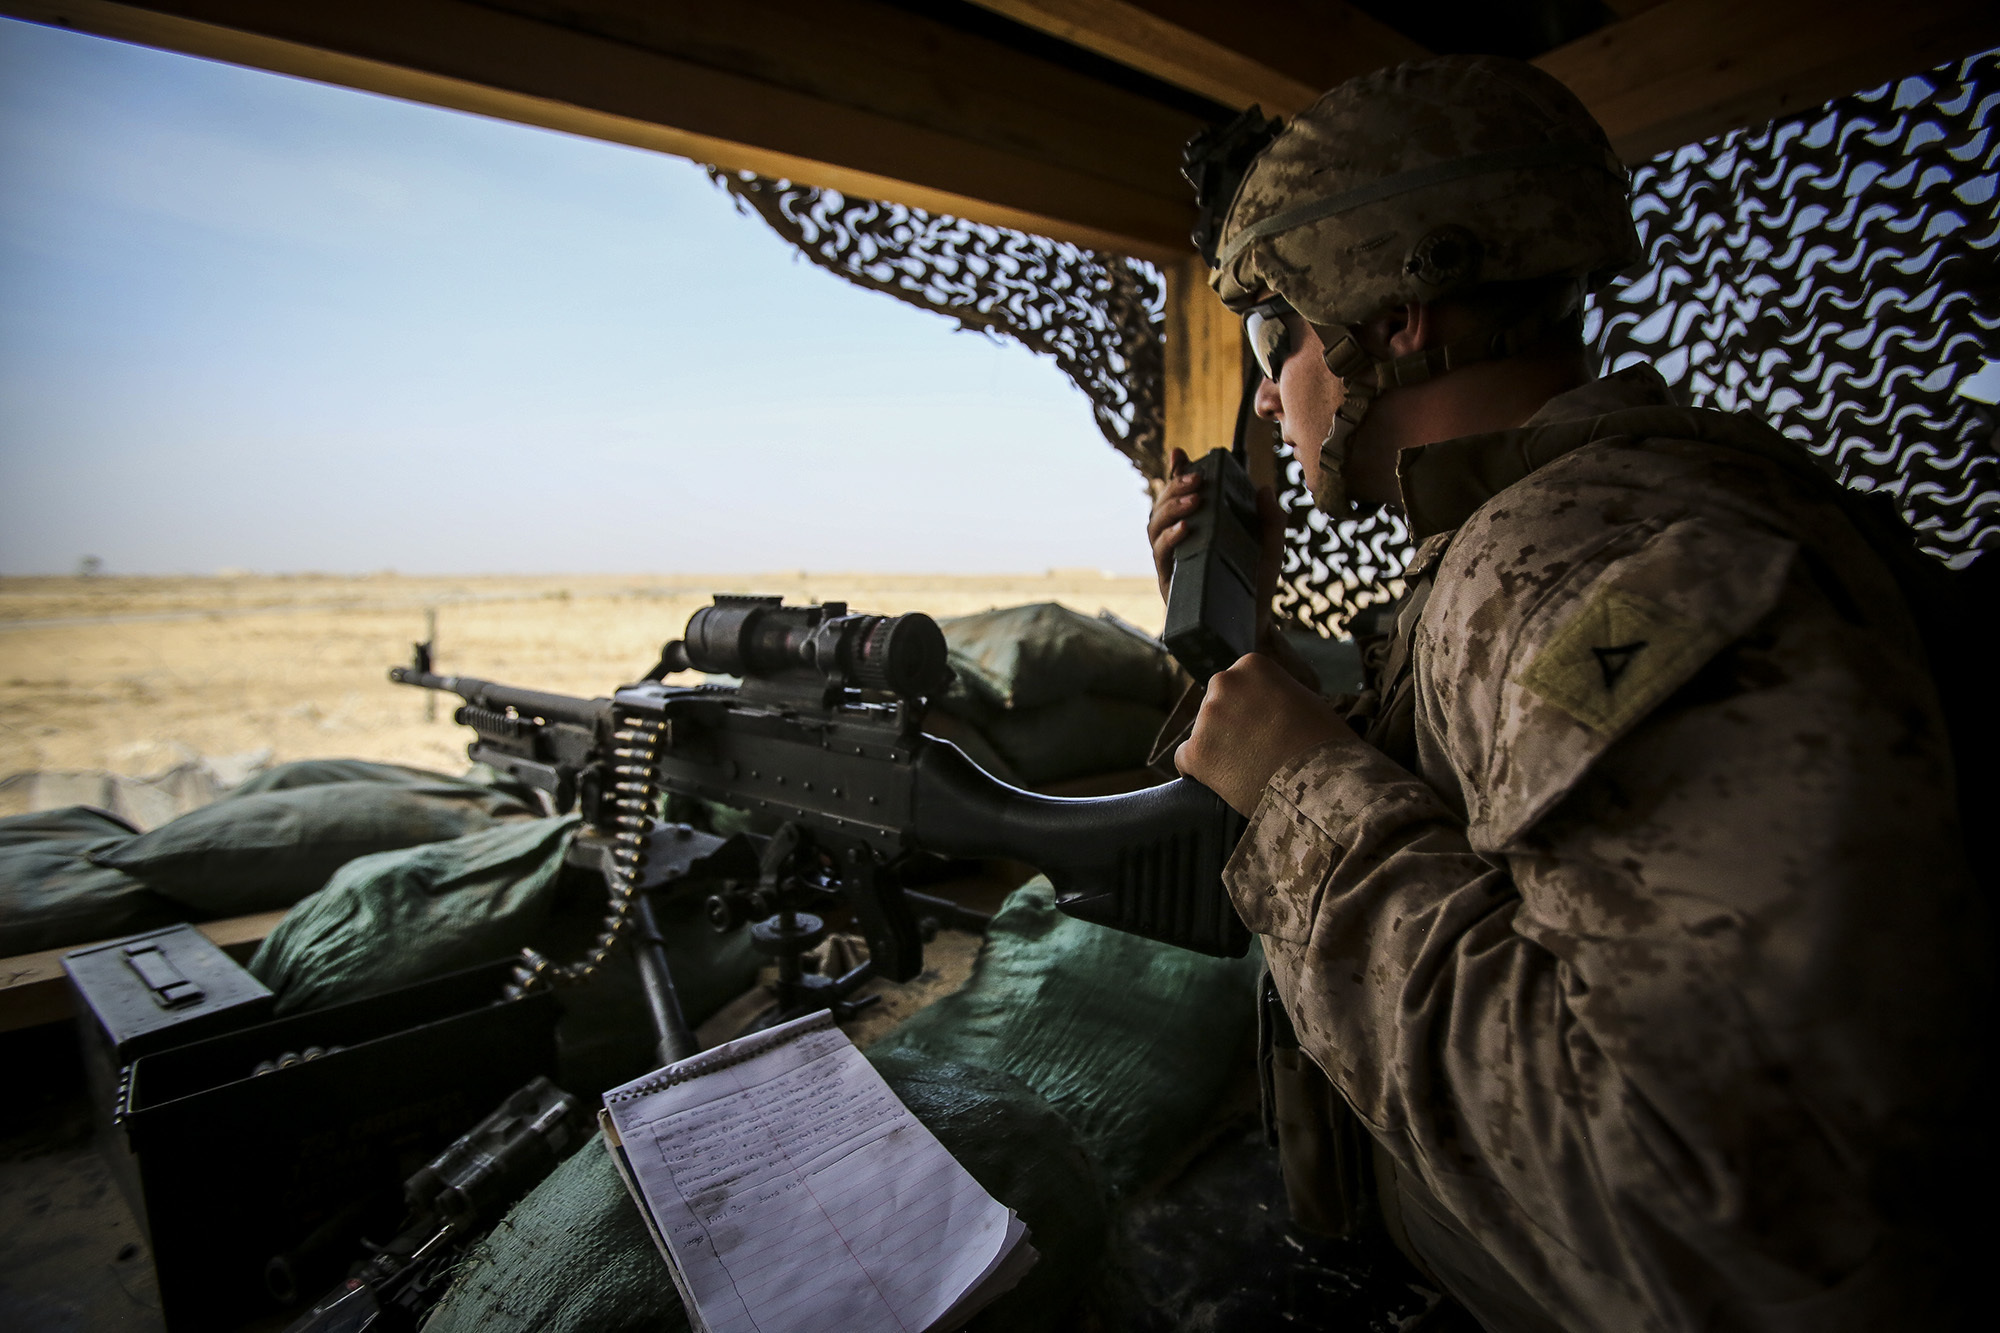 U.S. Marines maintaining security of coalition resources in Iraq